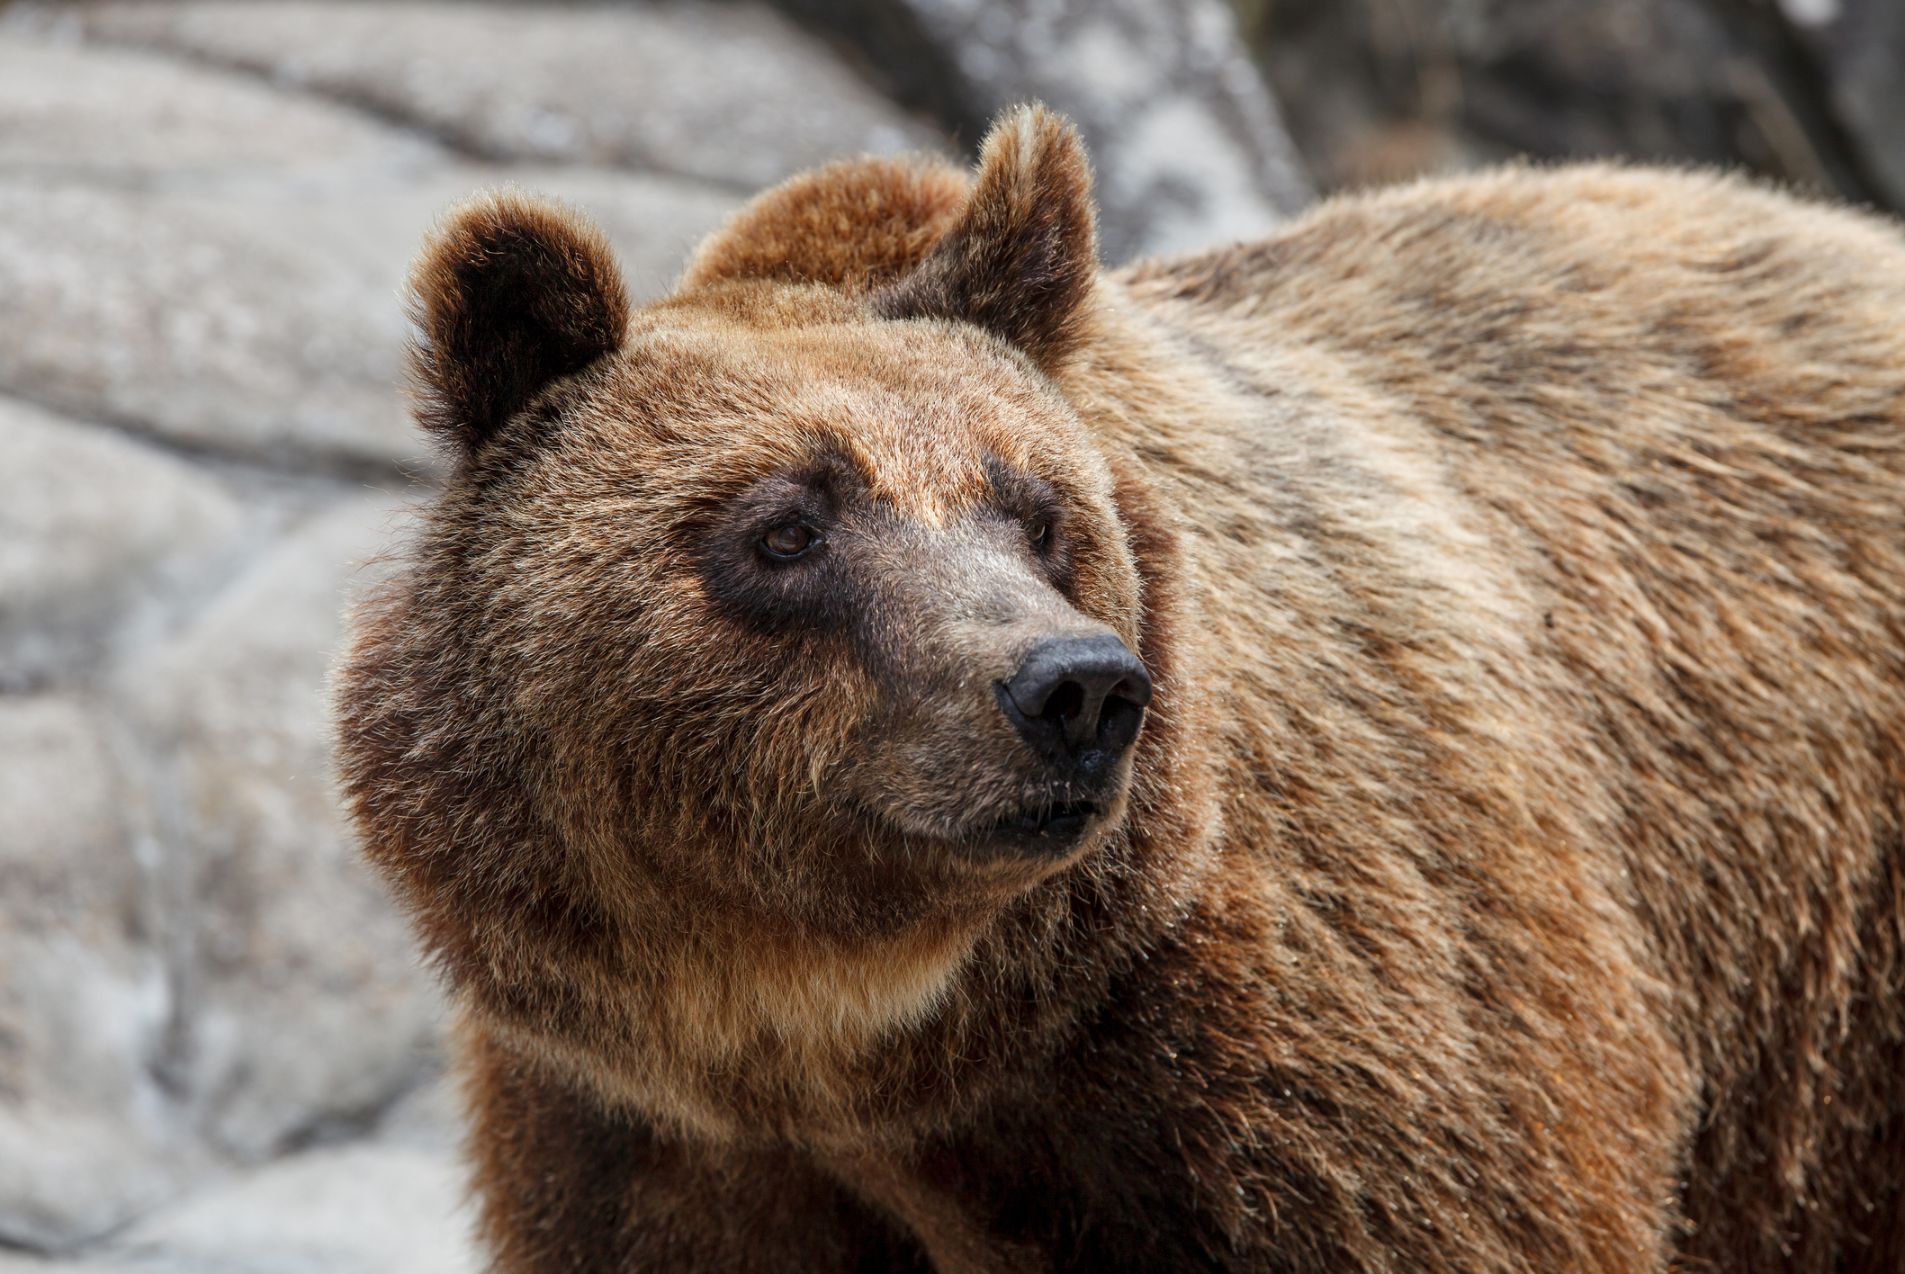 A brown bear from Greece's Pindus Mountains